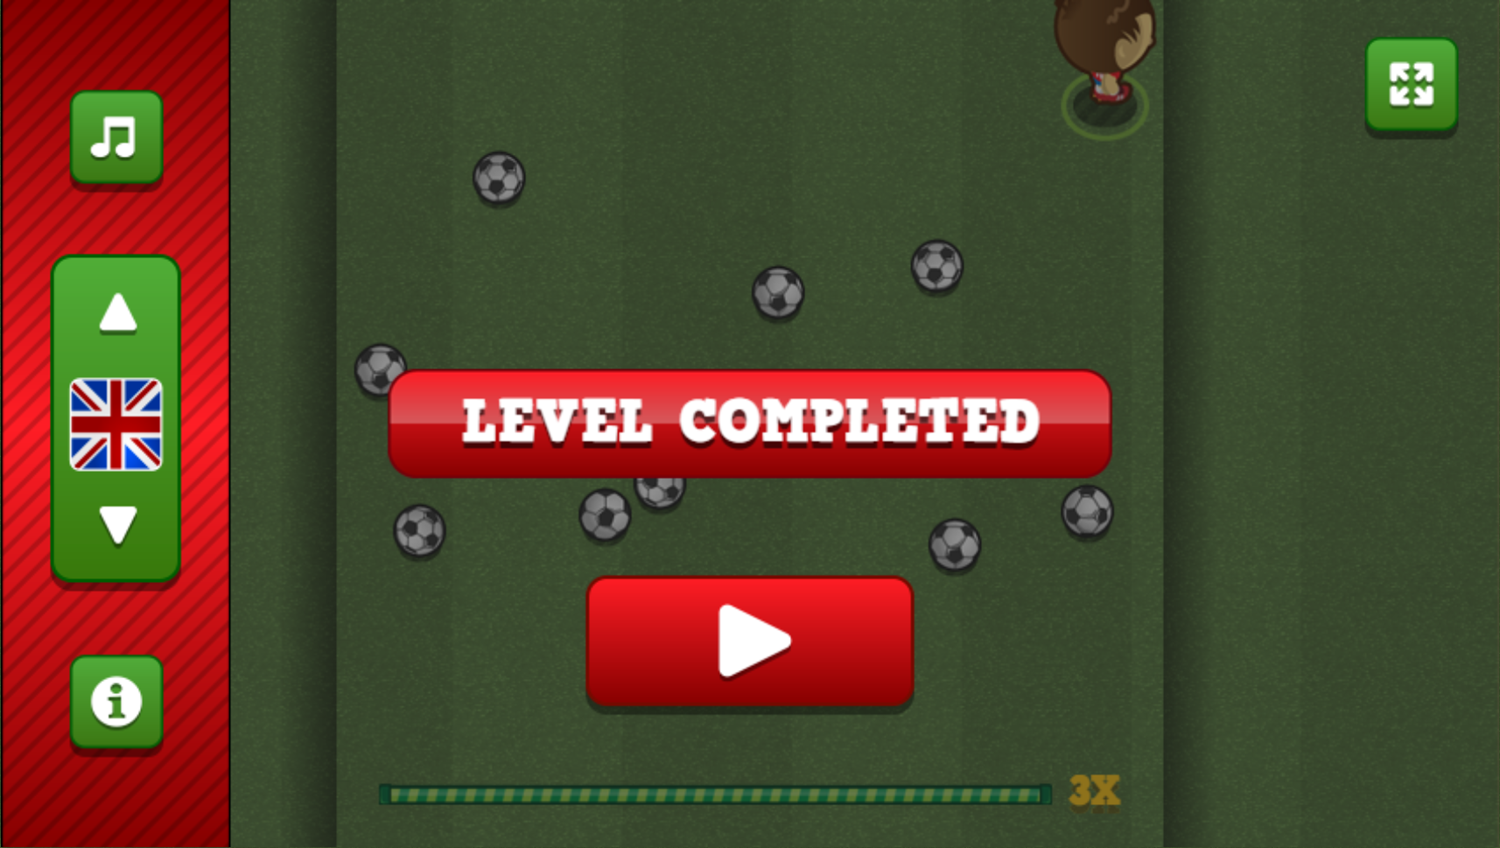 Football.io Game Level Completed Screenshot.